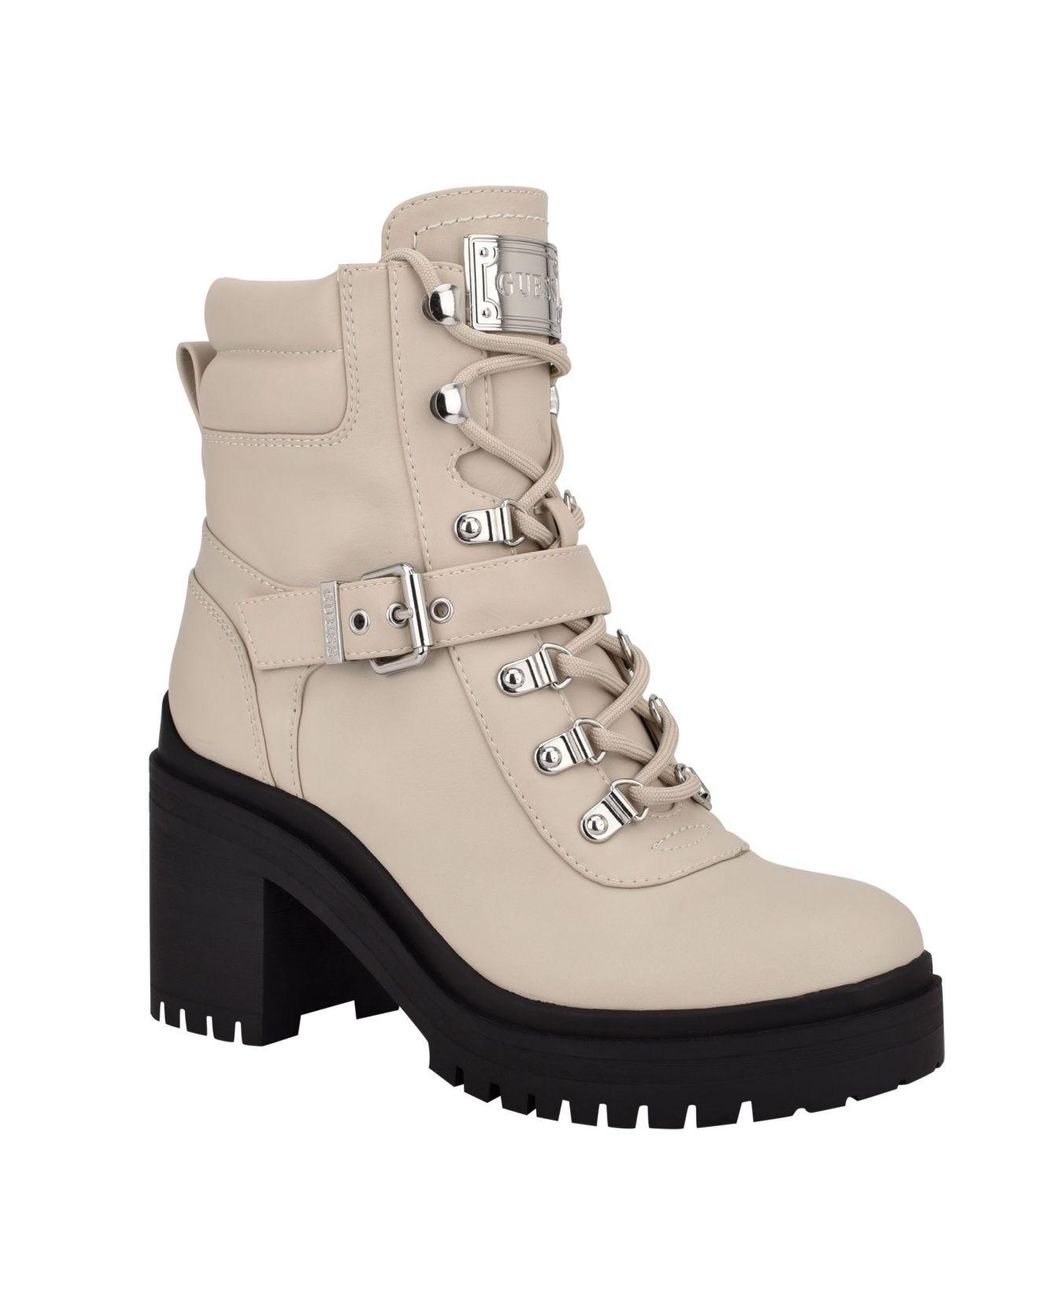 Guess Canaly Lug Sole Block Heel Combat Boots in White | Lyst